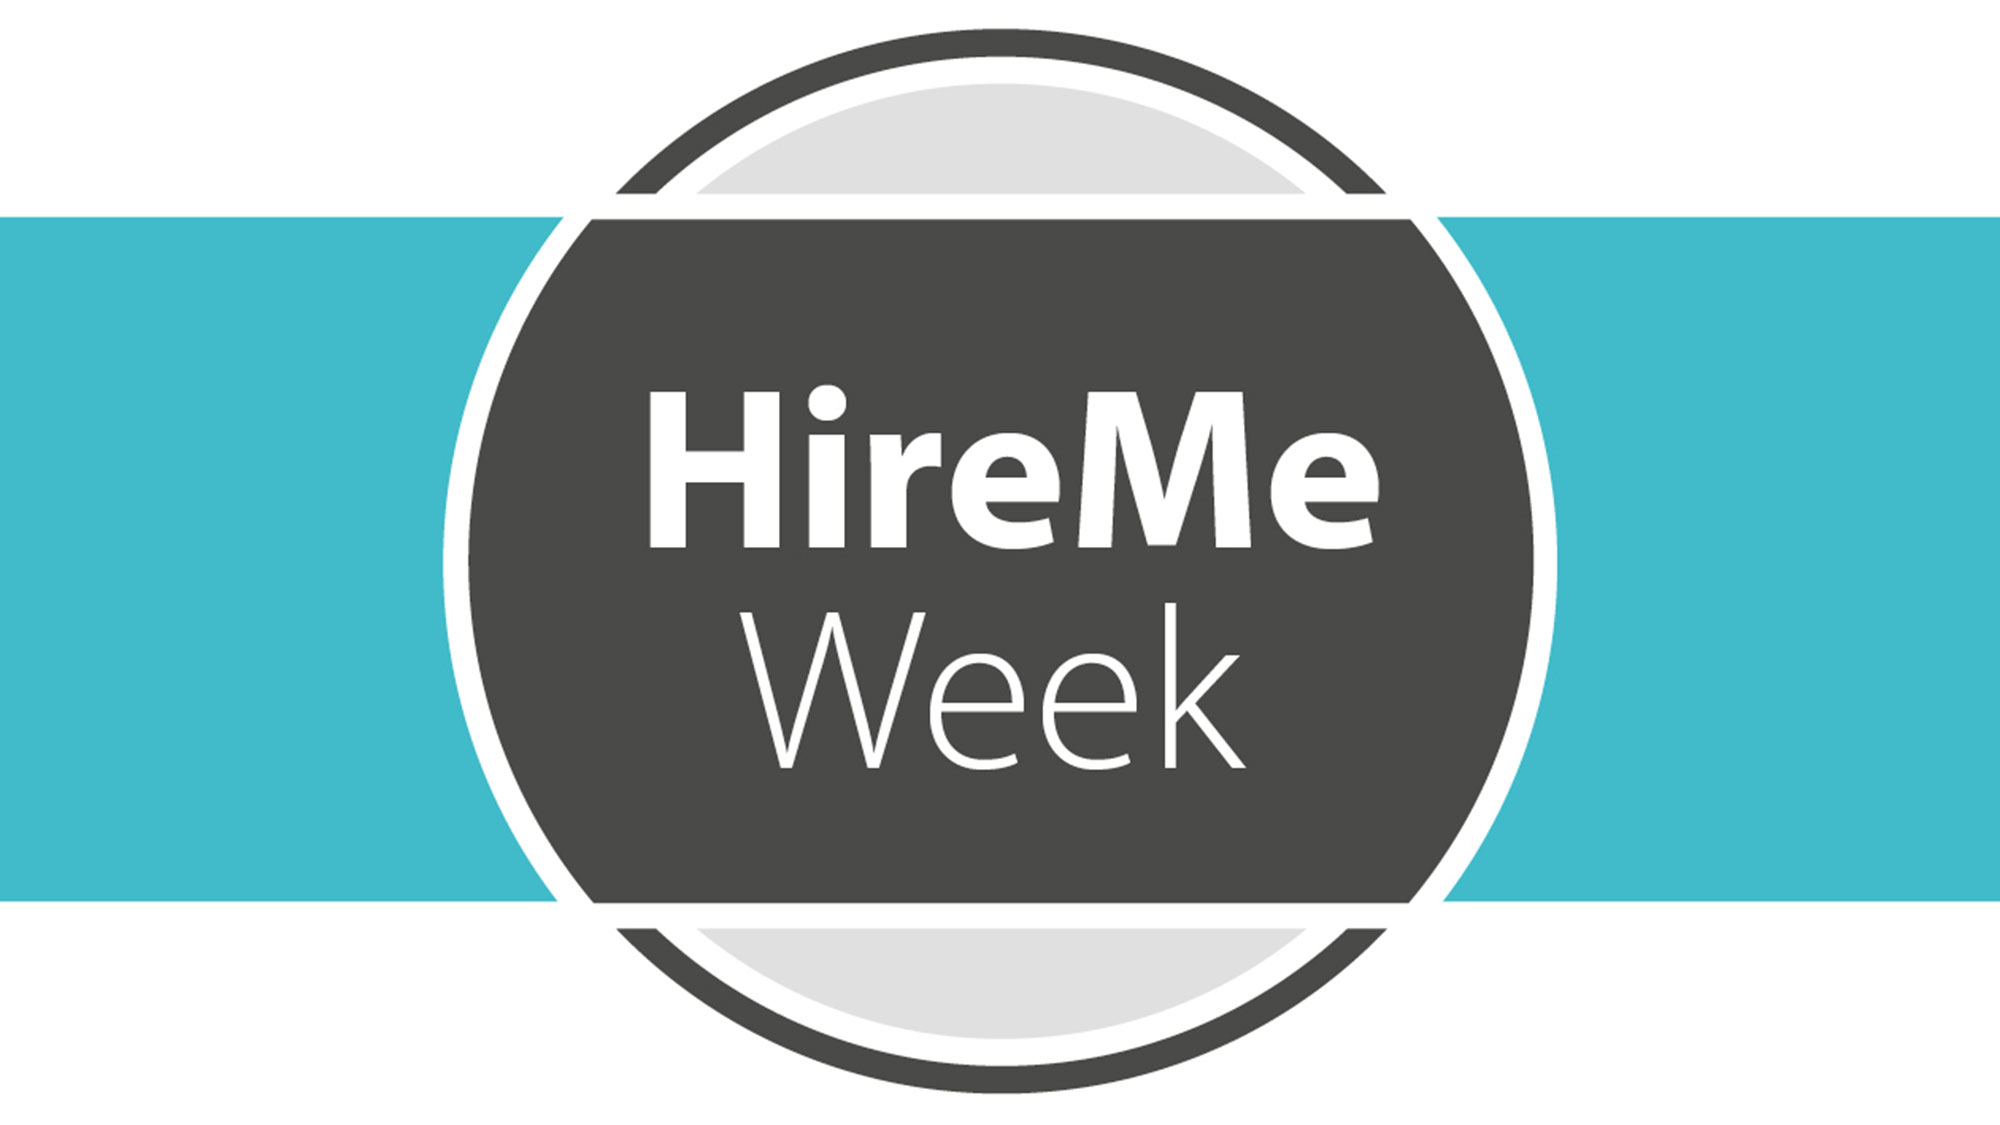 HireMe Week: Finding your First Graduate Job